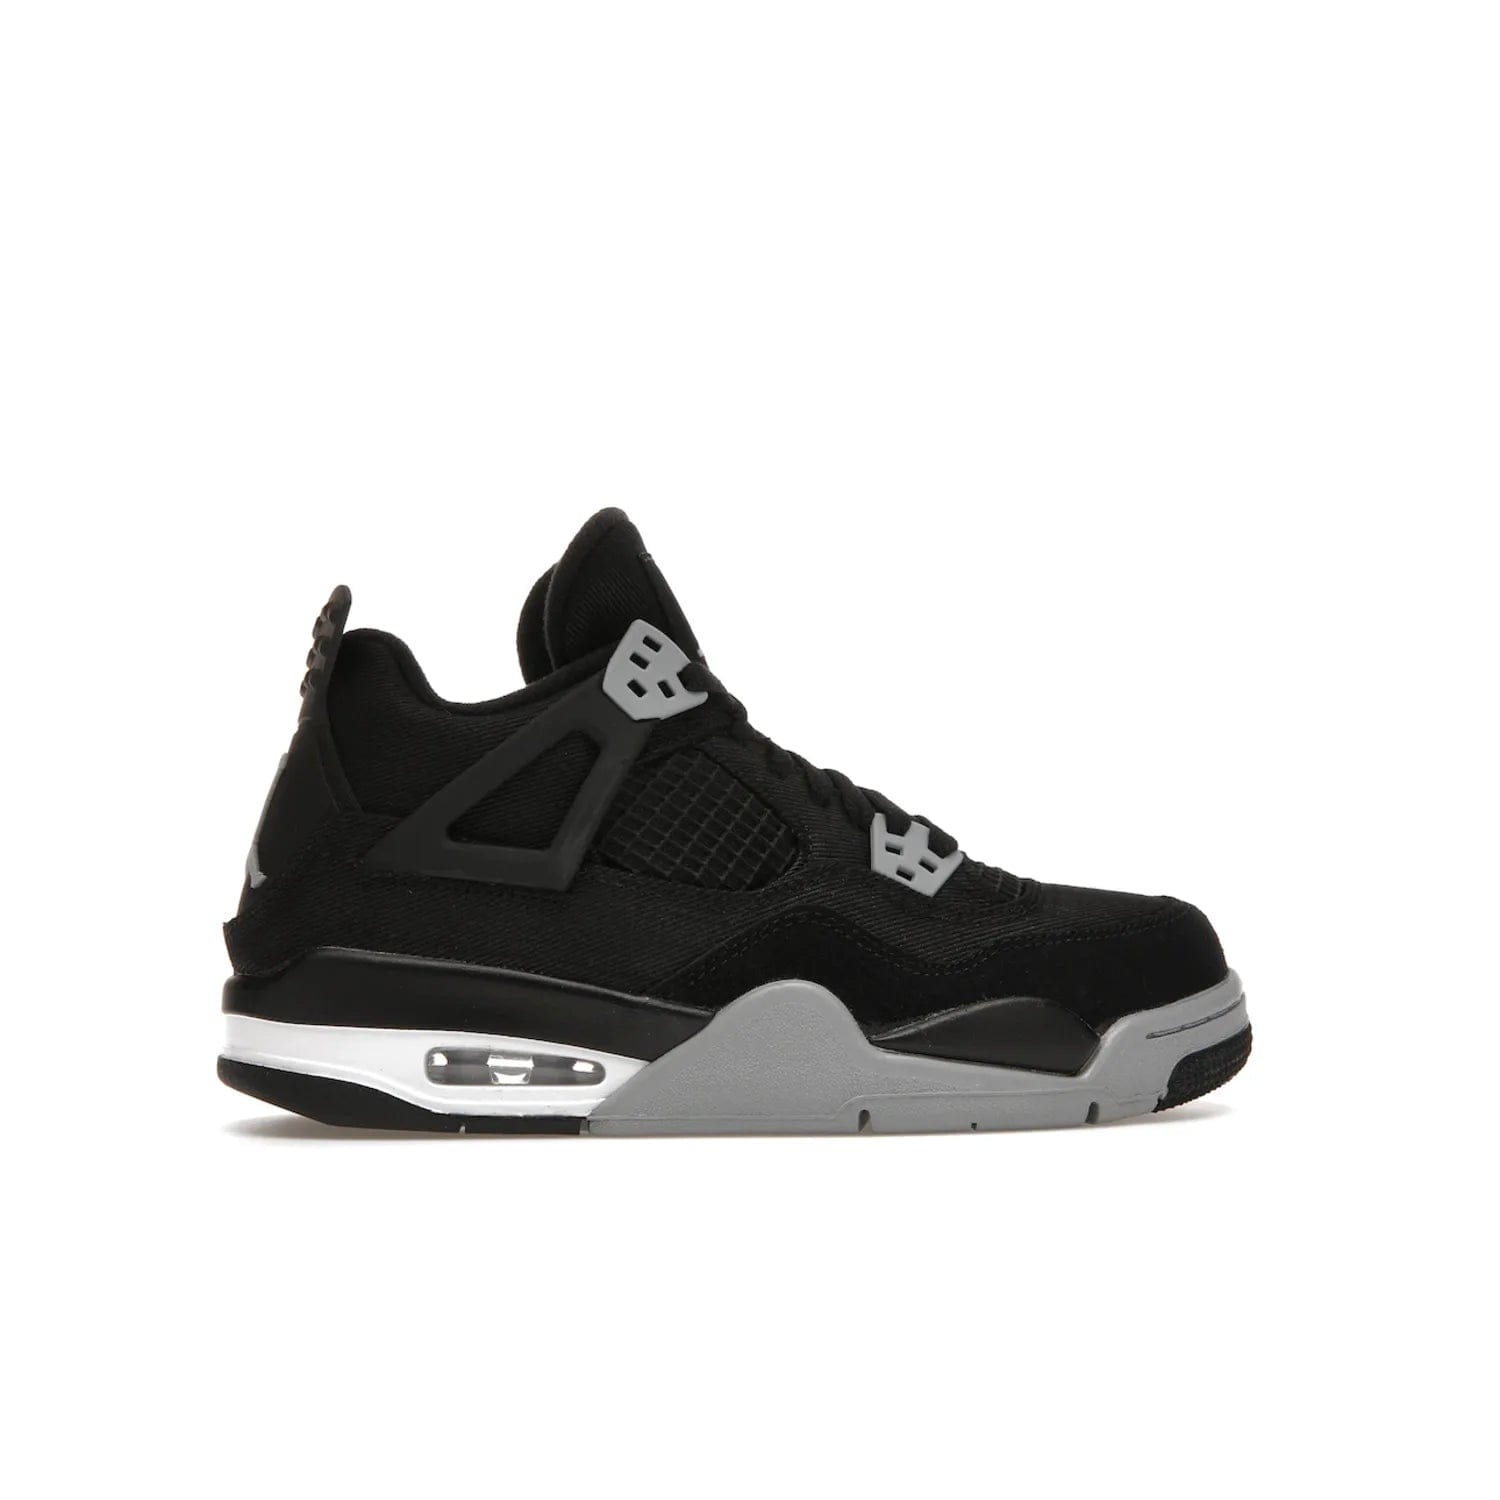 Jordan 4 Retro Black Canvas (GS) - Image 36 - Only at www.BallersClubKickz.com - Premium Air Jordan 4 Retro Black Canvas in grade-schooler's catalog. Featuring black suede canvas upper, grey molding, accents in red, white midsole, woven Jumpman tag, & visible AIR cushioning. Releasing Oct. 1, 2022.